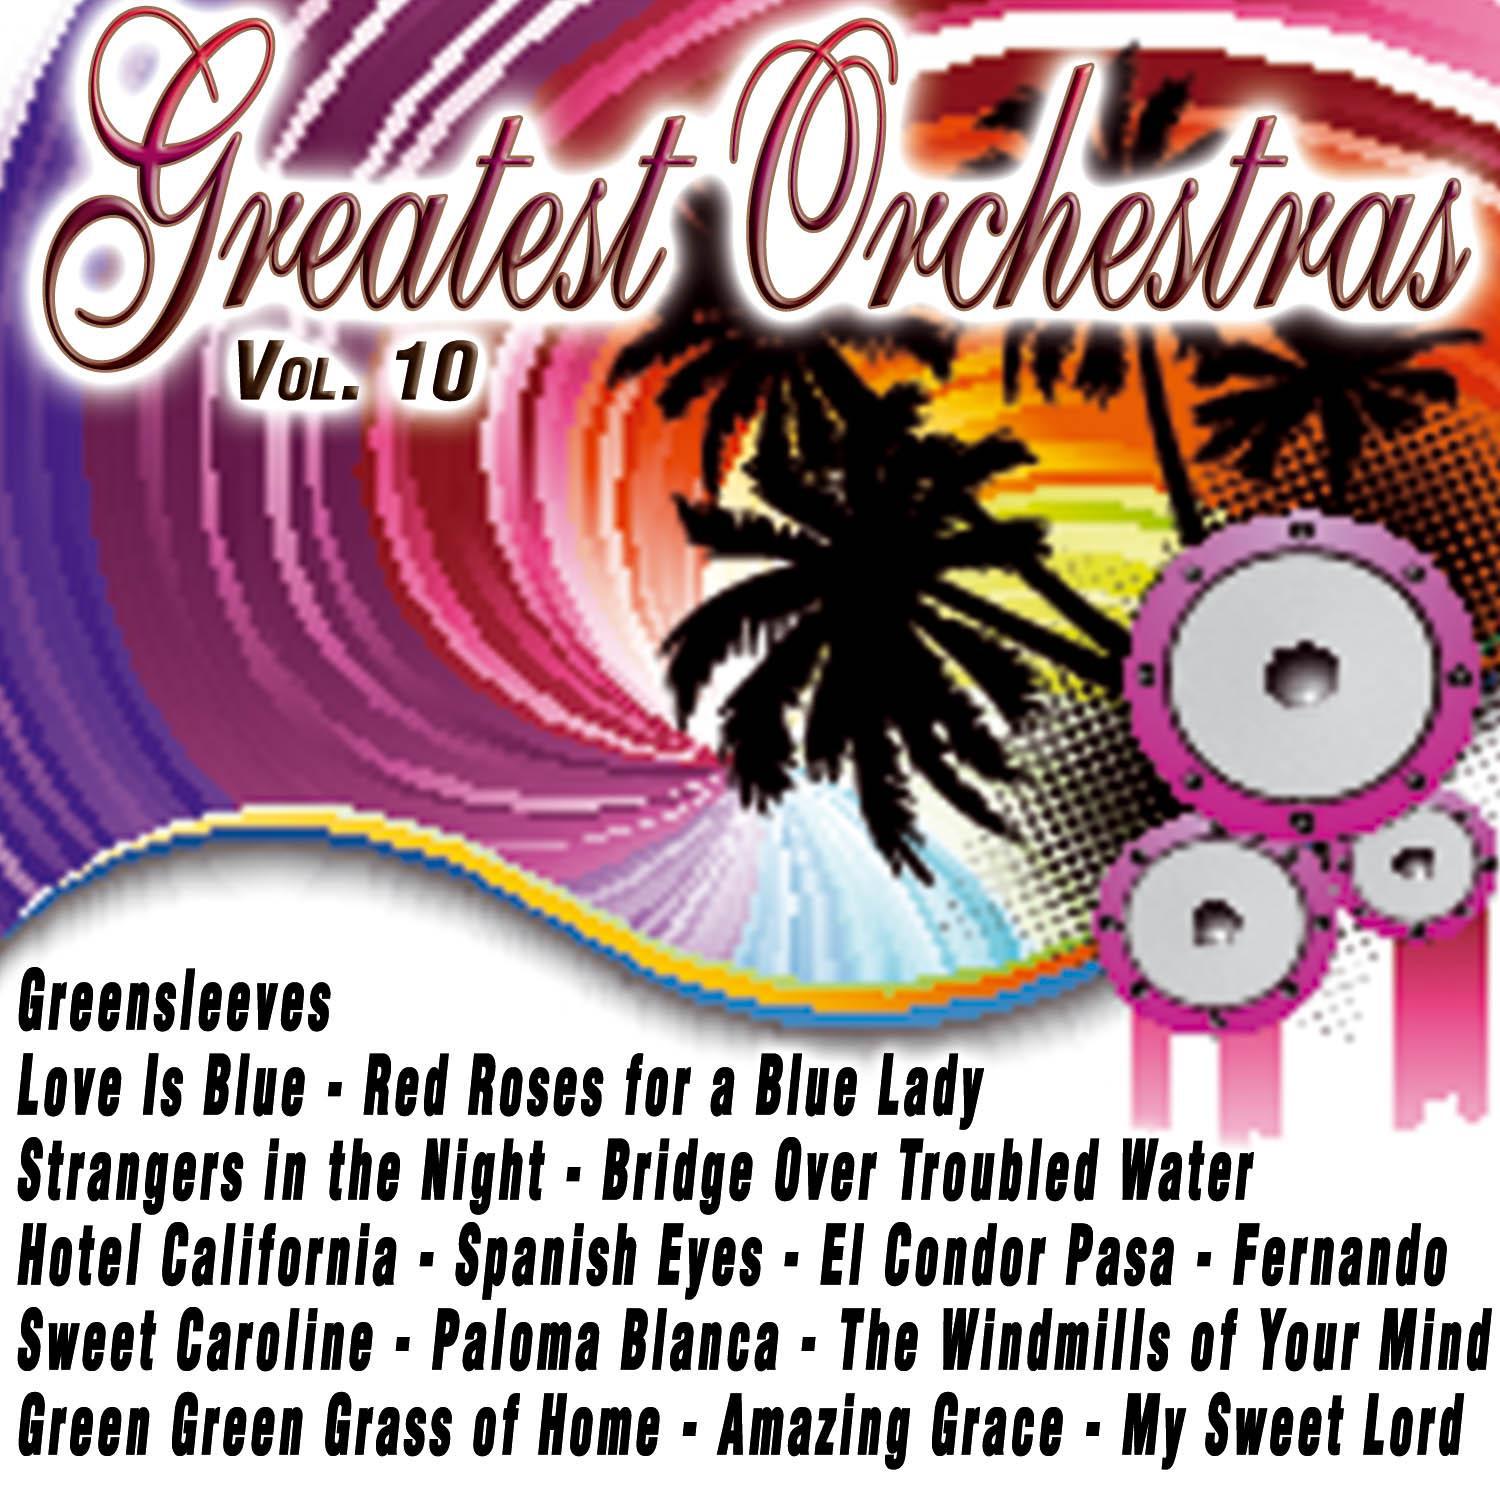 Greatest Orchestras Vol.10